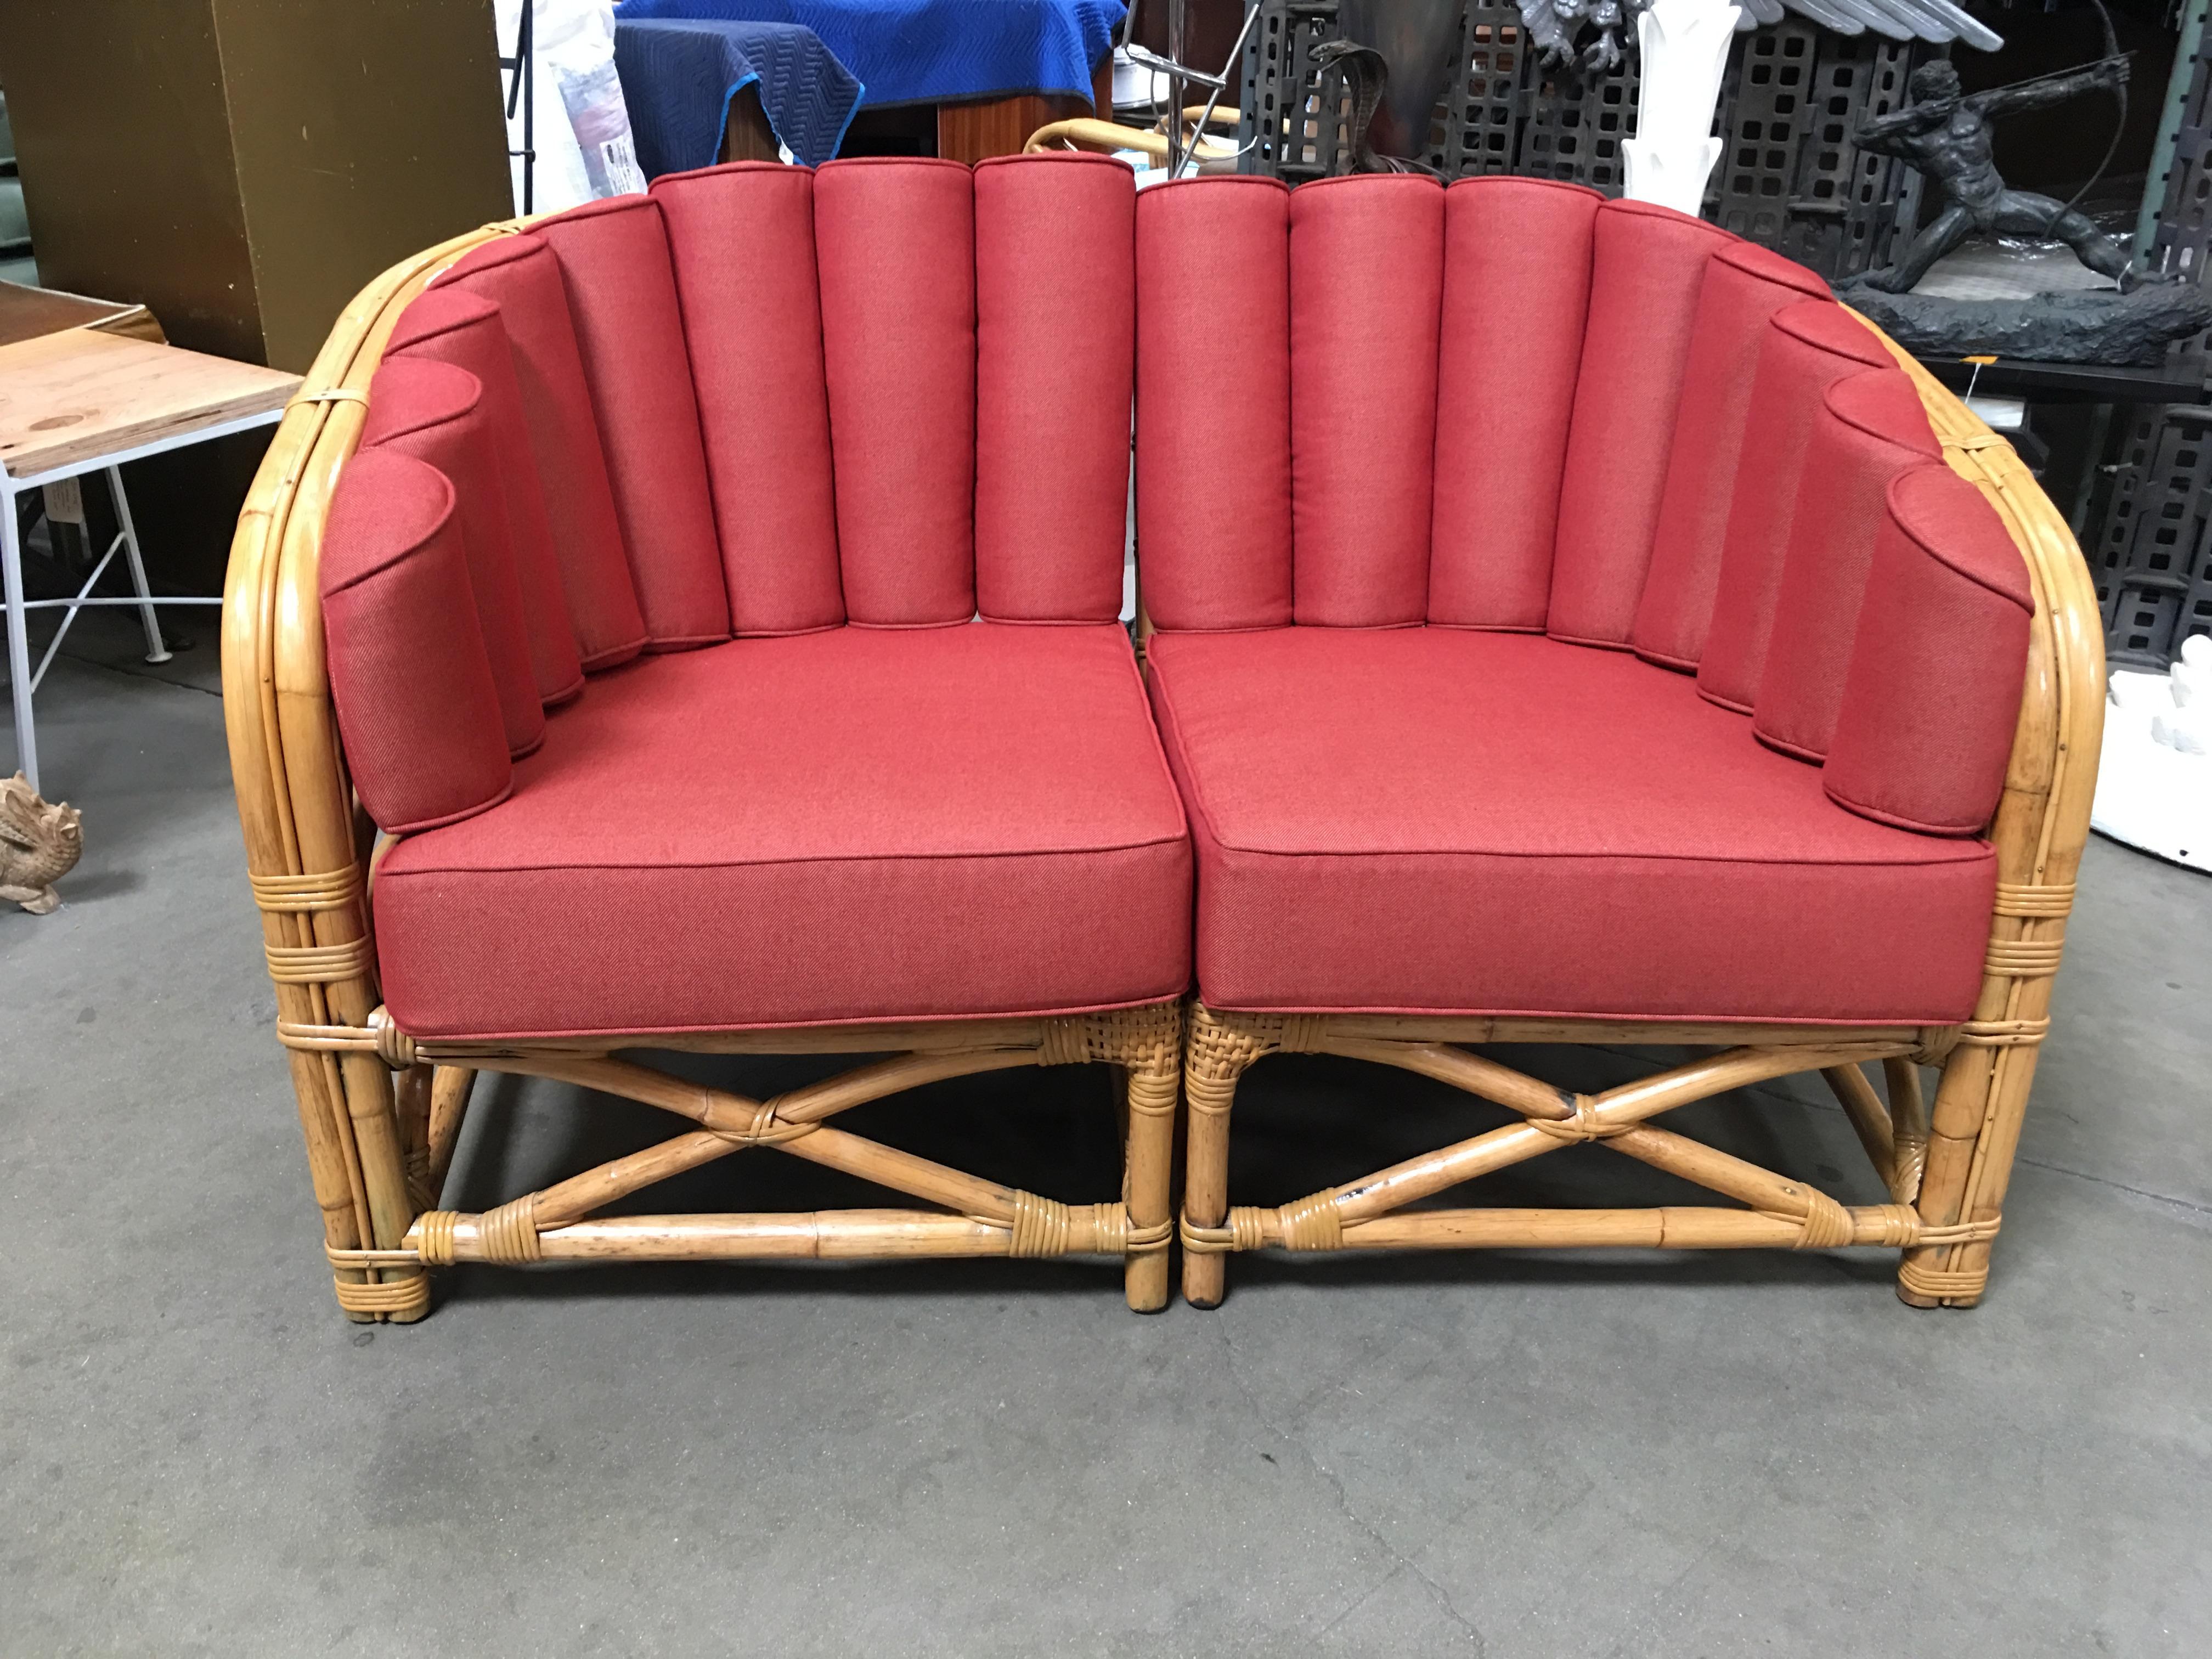 1930s Art Deco sectional two-seat rattan sofa features a red shell back seat around the perimeter of the backrest and X base. Restored to new for you. C.O.M. additional is available by request.  All rattan, bamboo and wicker furniture has been